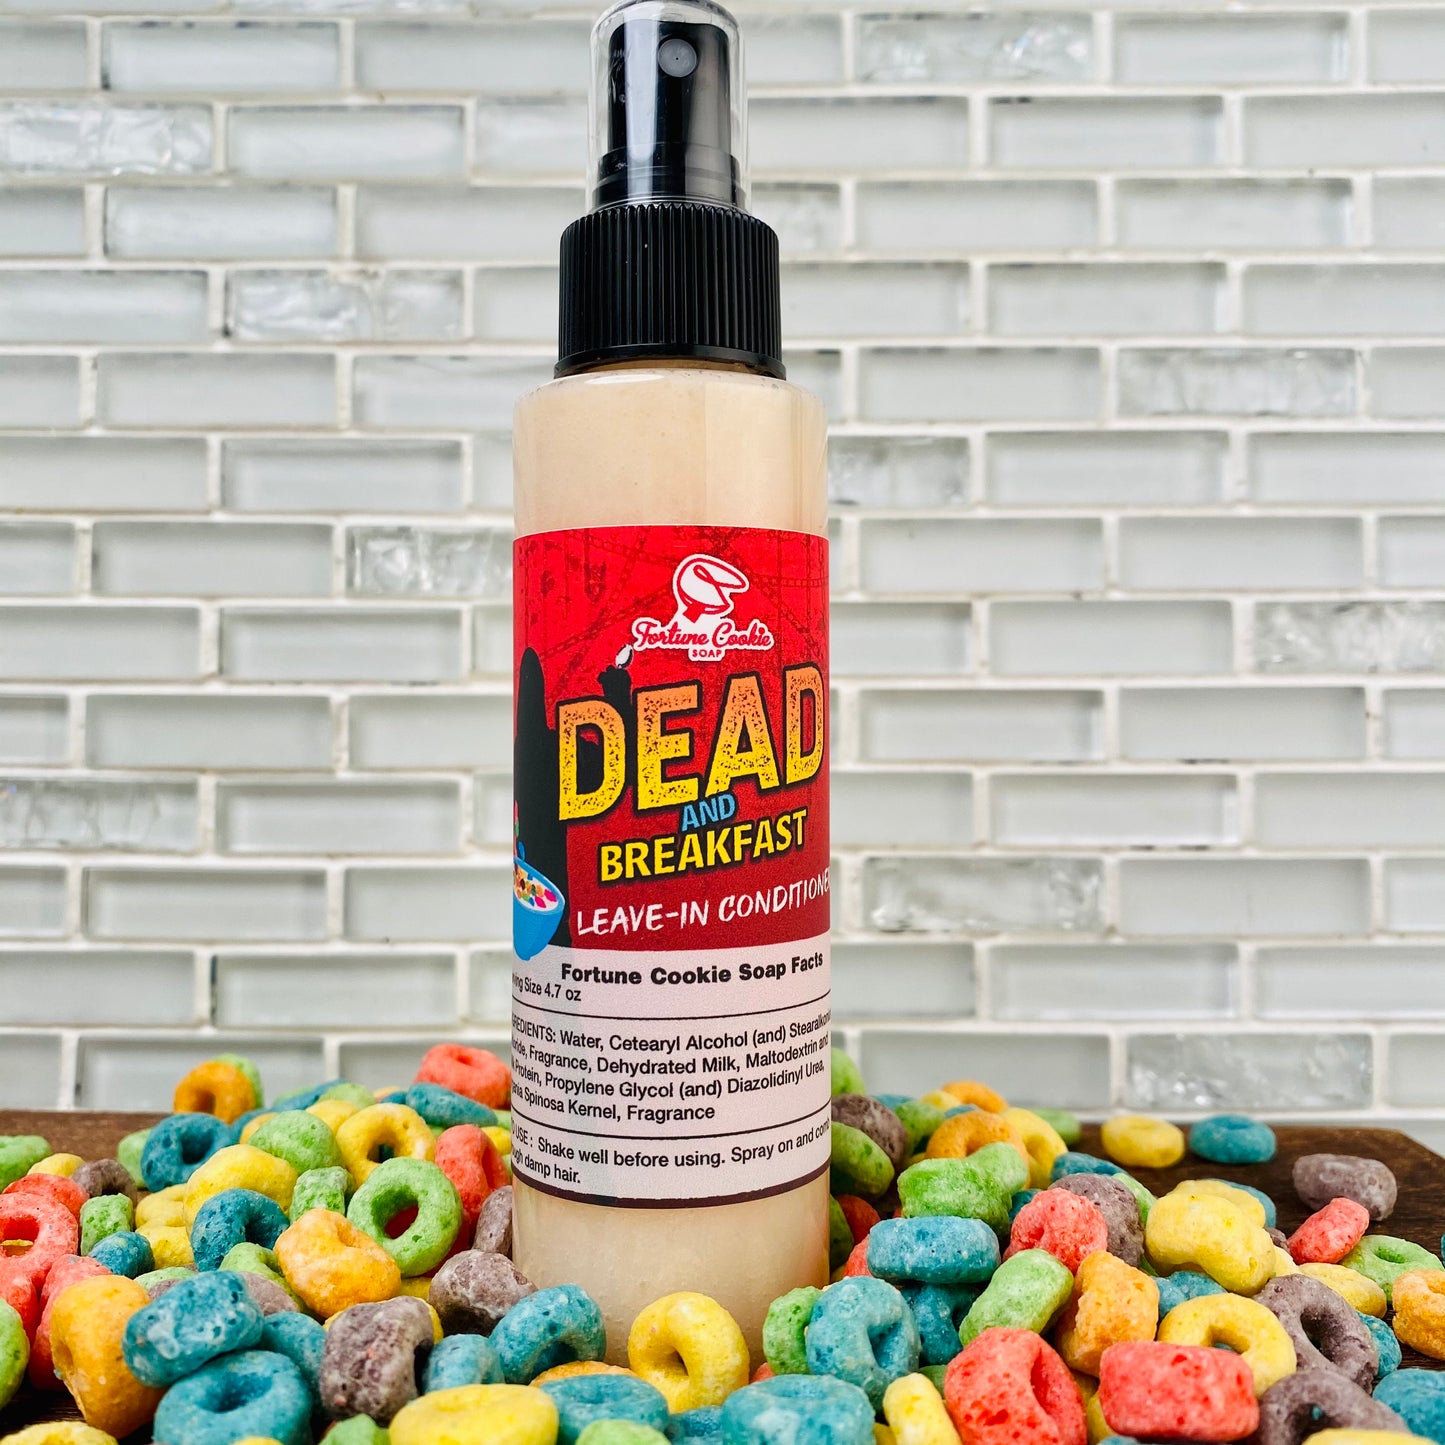 DEAD AND BREAKFAST Leave-In Conditioner